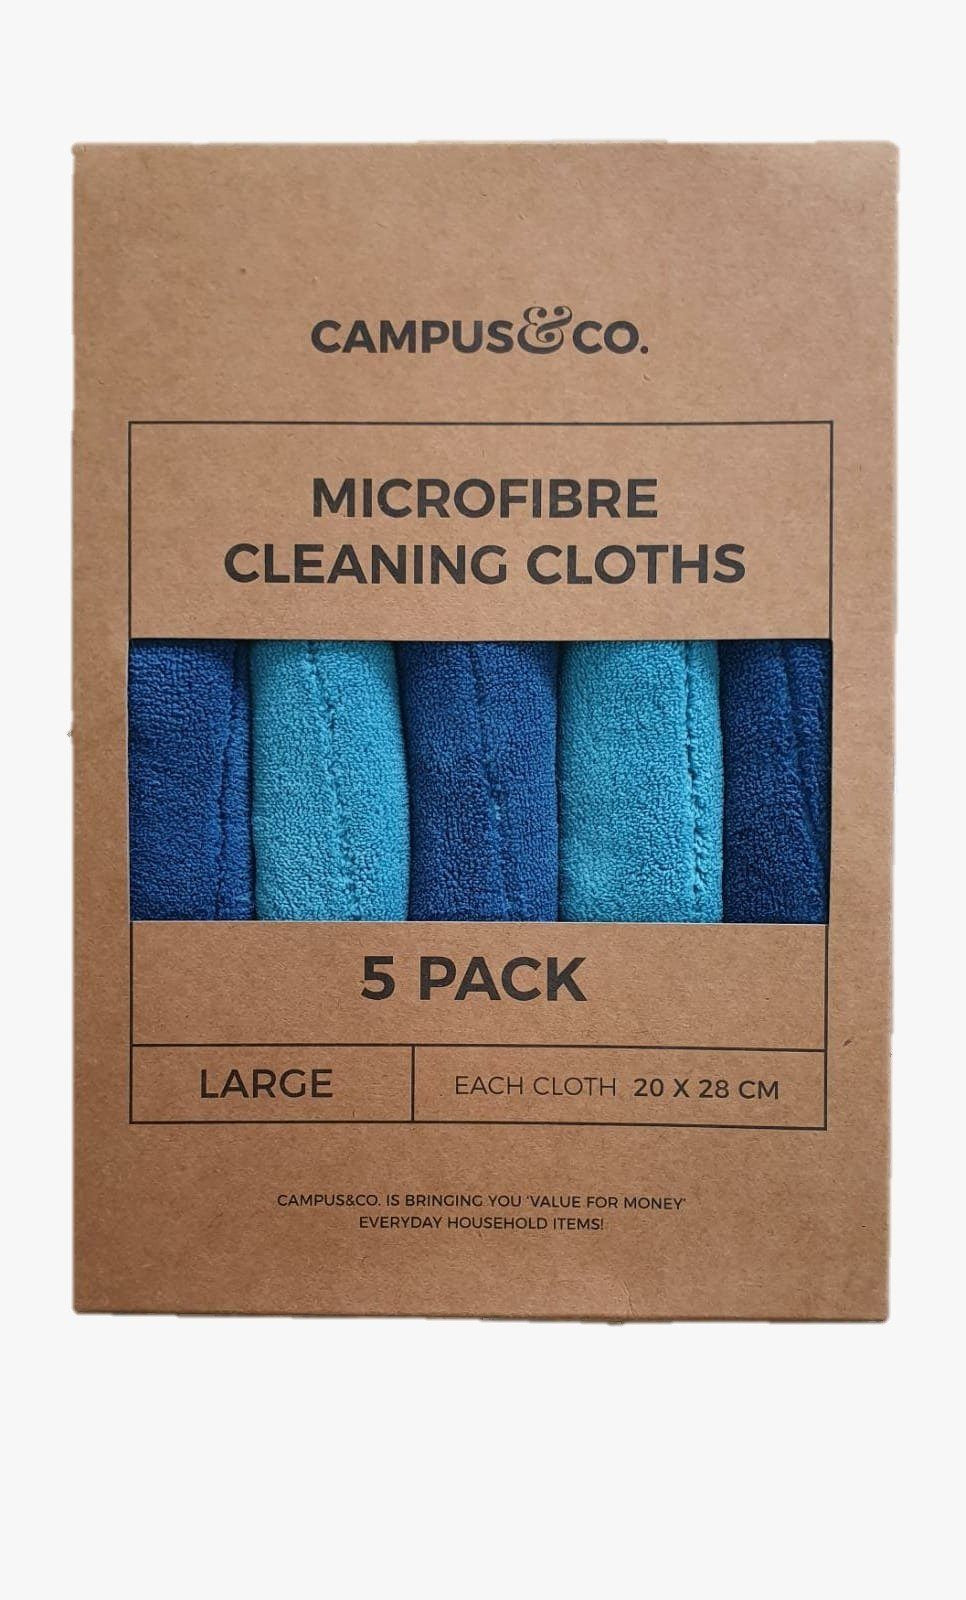 Campus&Co. Microfibre Cleaning Cloths Large 5pk